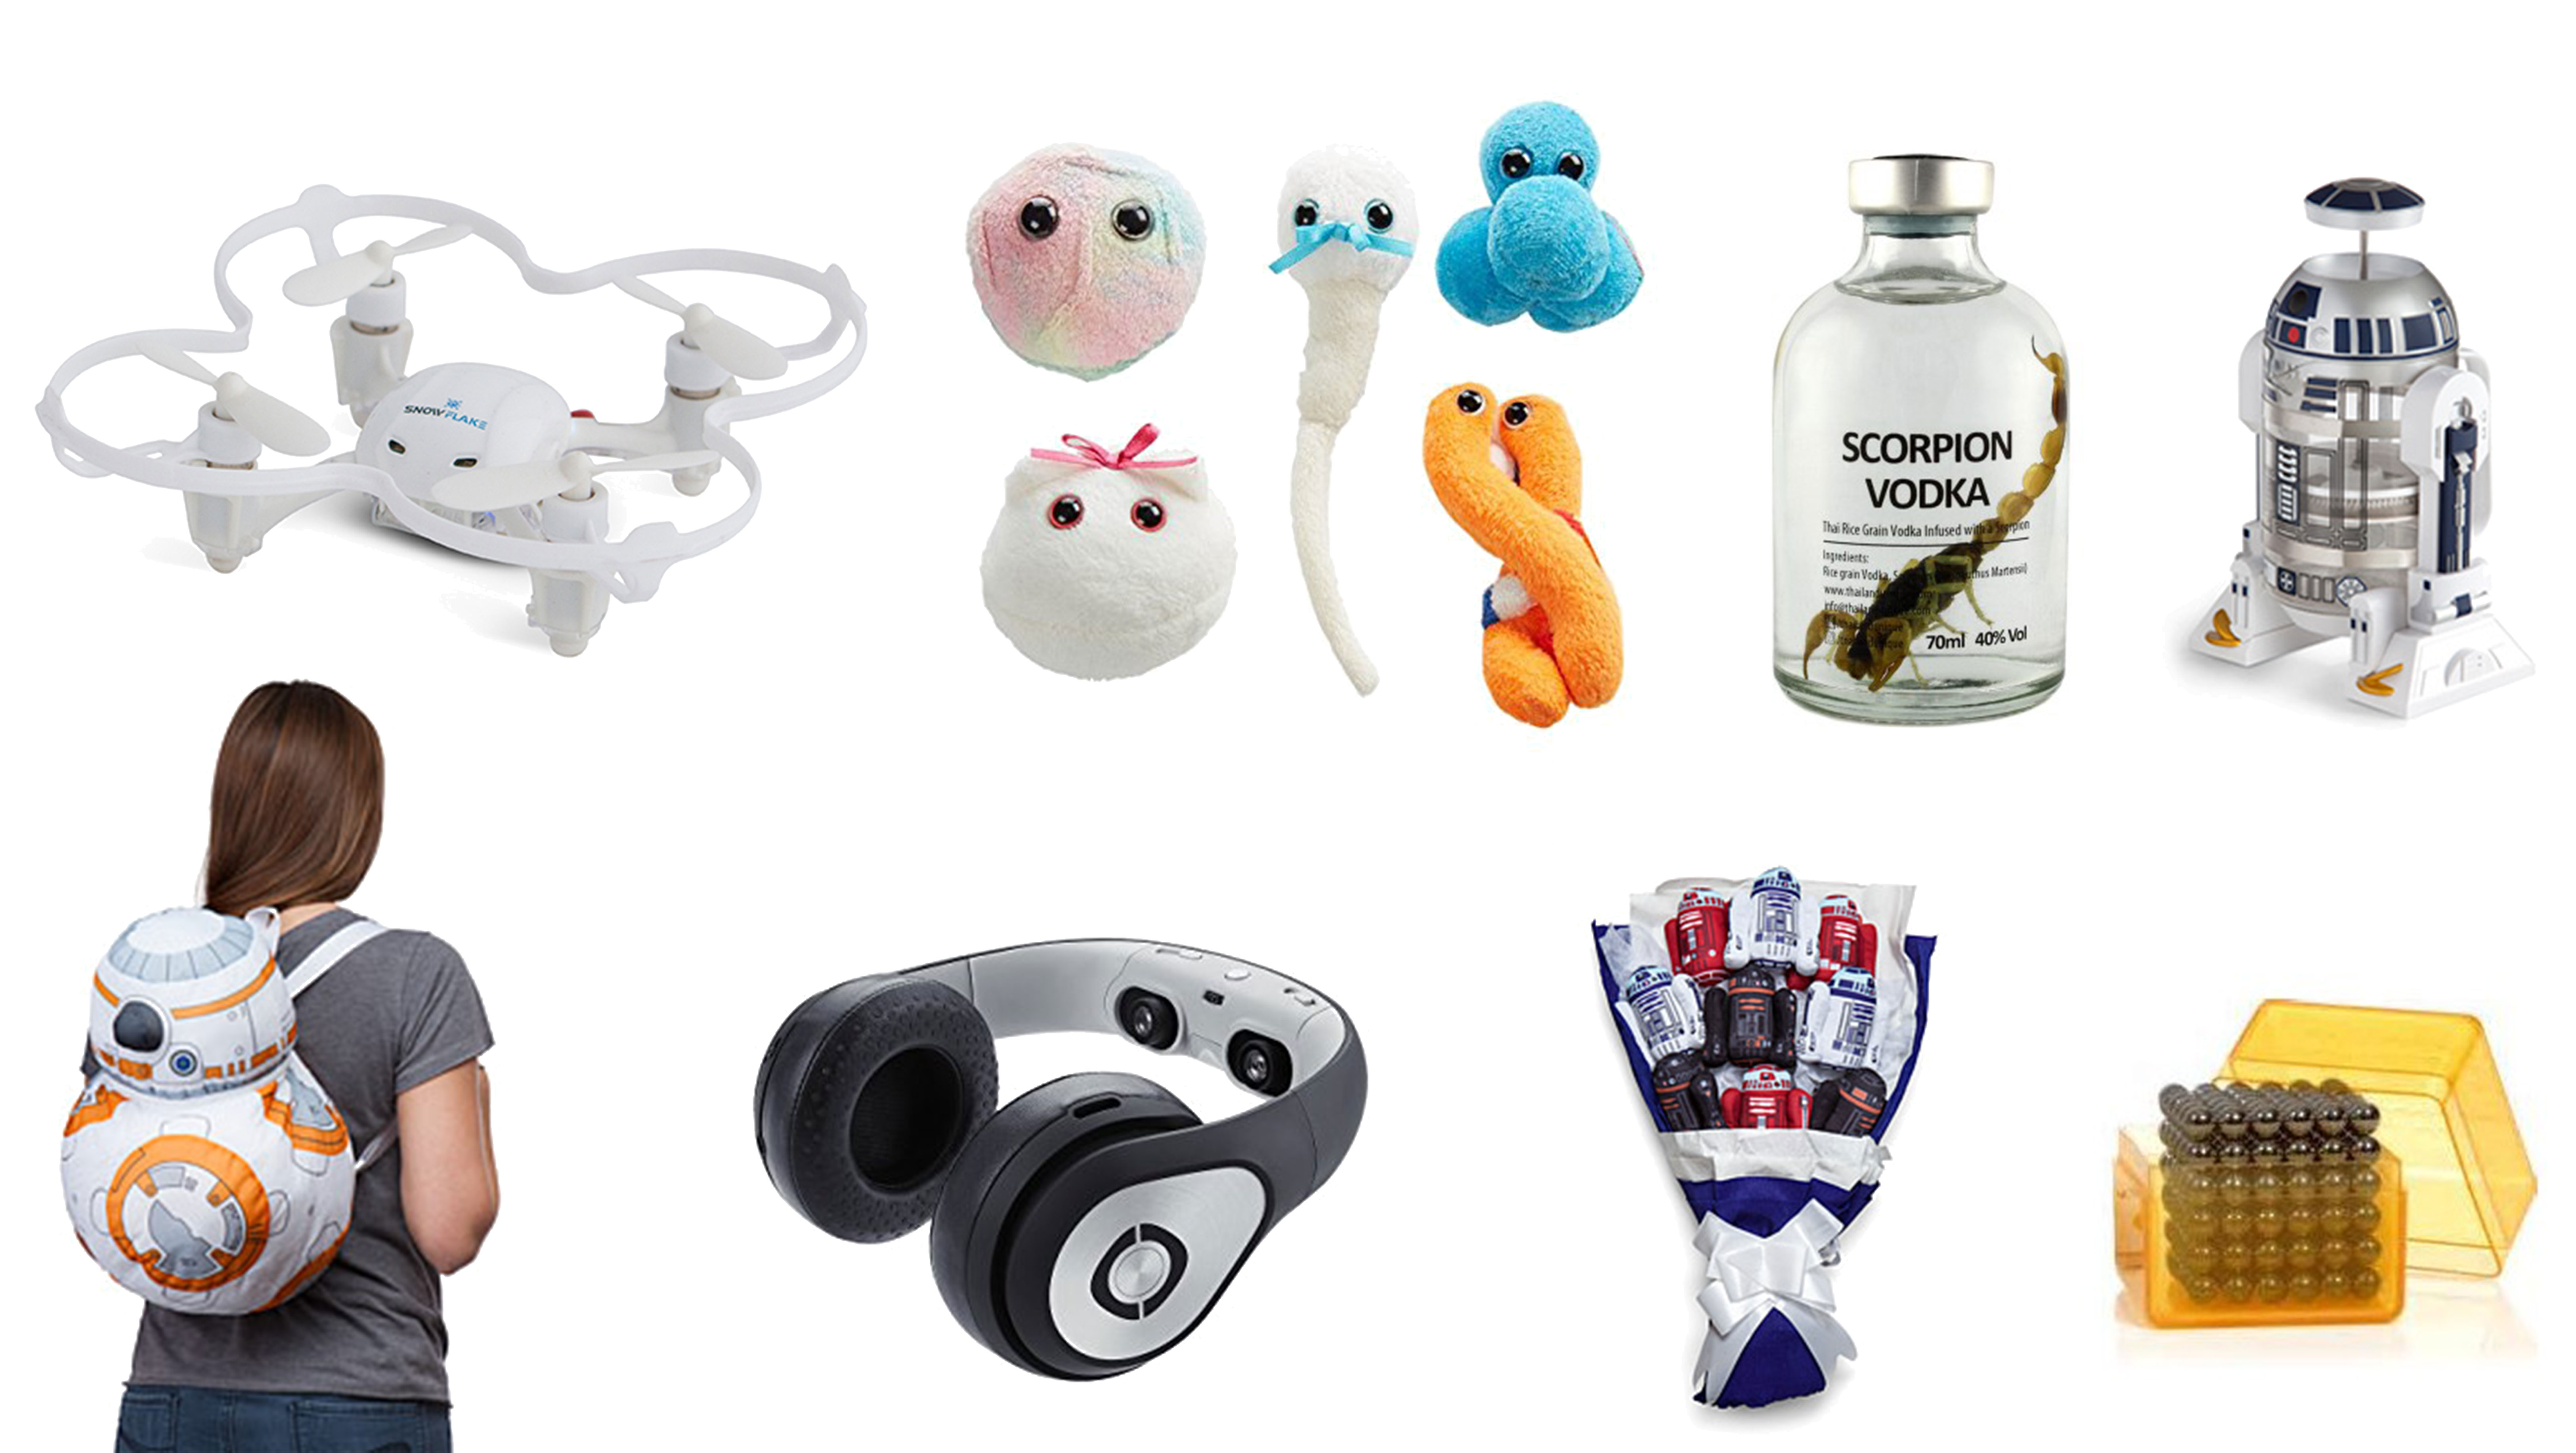 Top 20 Best Gifts For Nerds, Geeks & Techies In Your Life